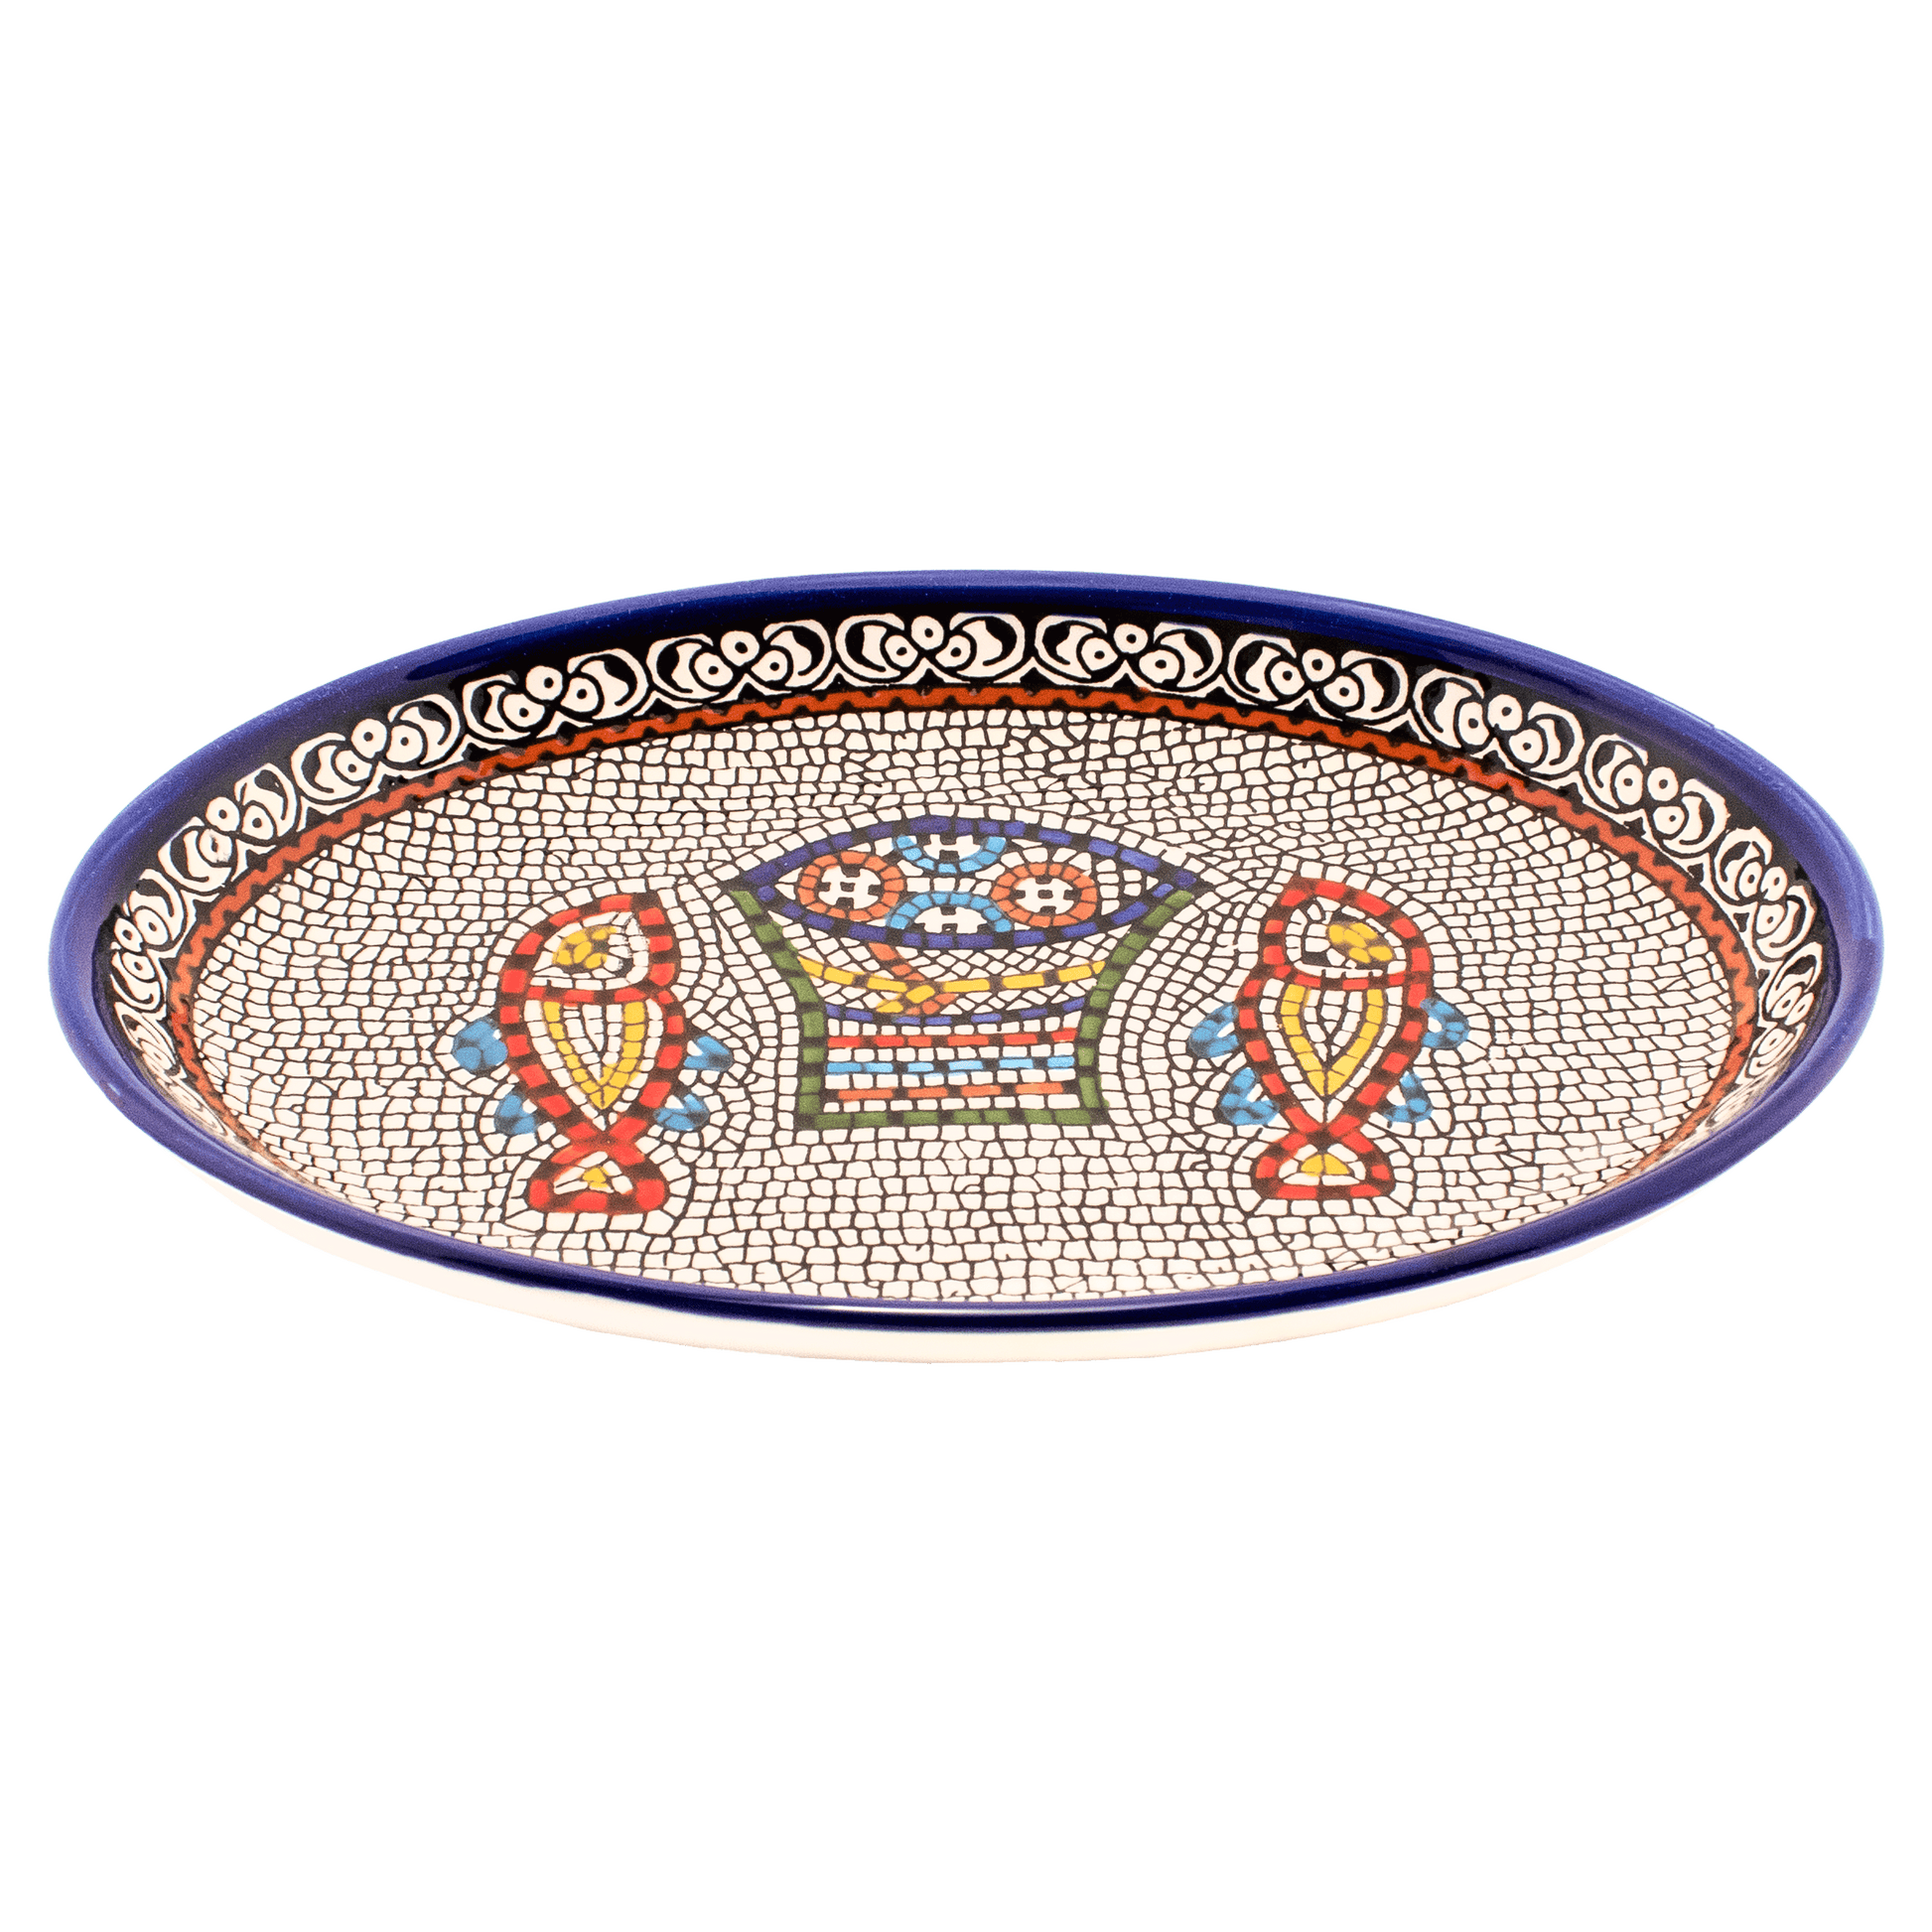 Large Armenian Ceramic Oval Serving Dish Loaves and Fish